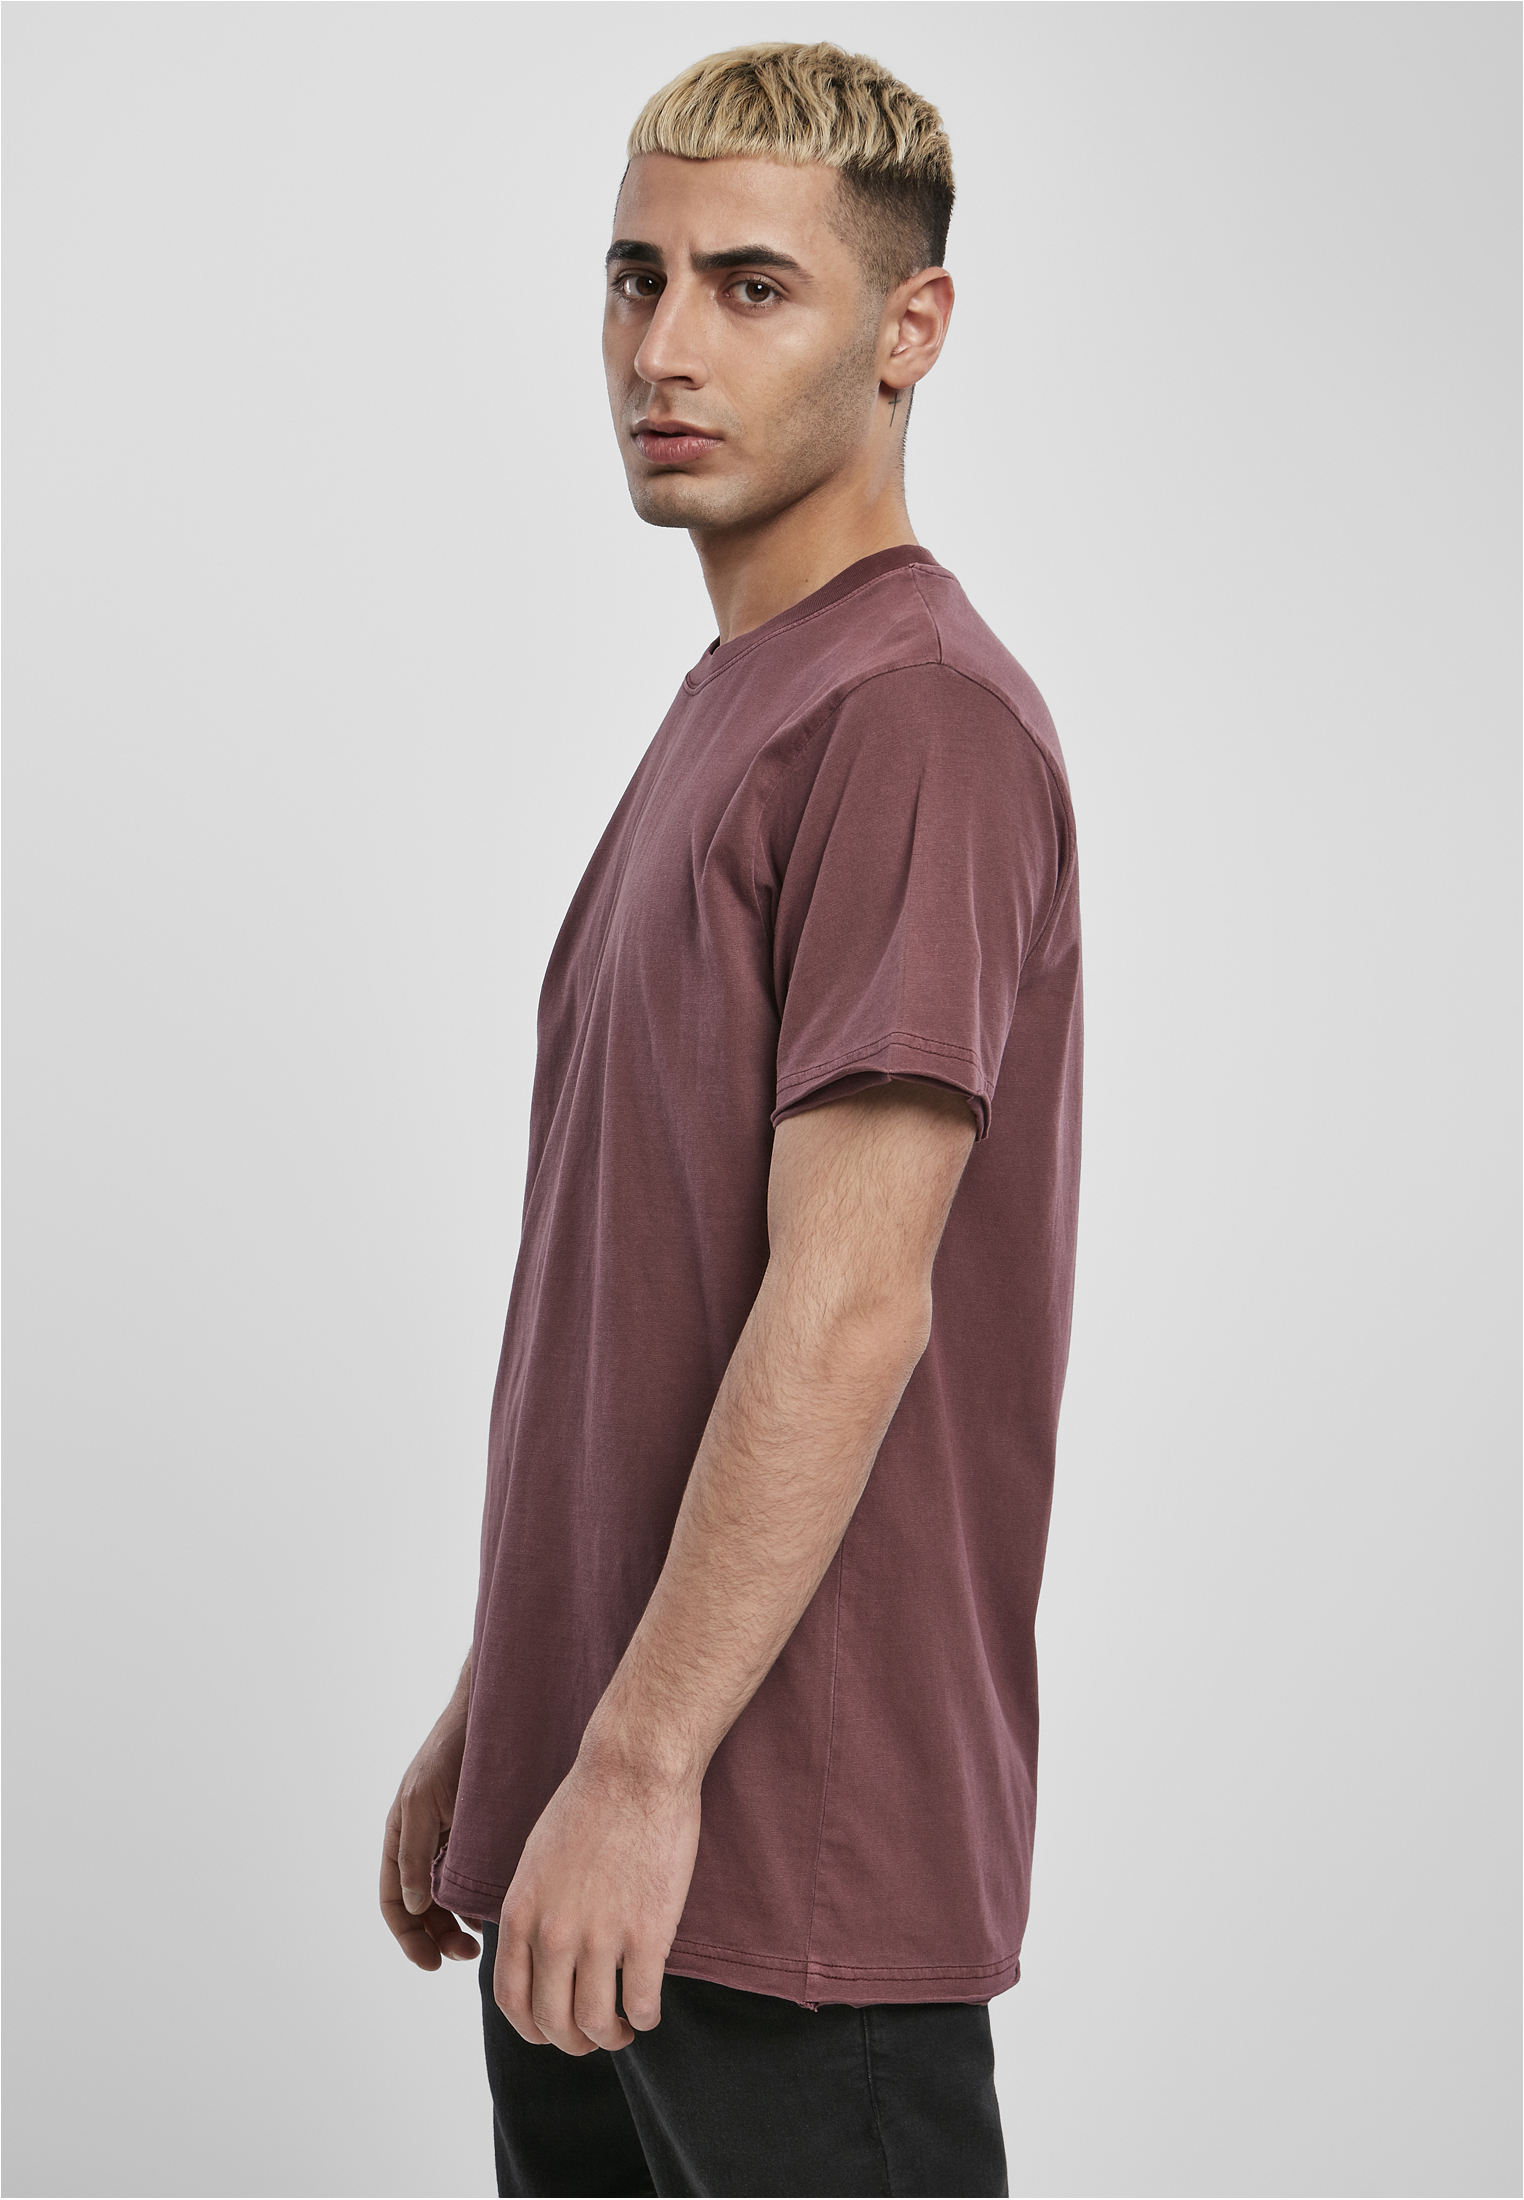 T-Shirts Open Edge Pigment Dyed Basic Tee in Farbe cherry